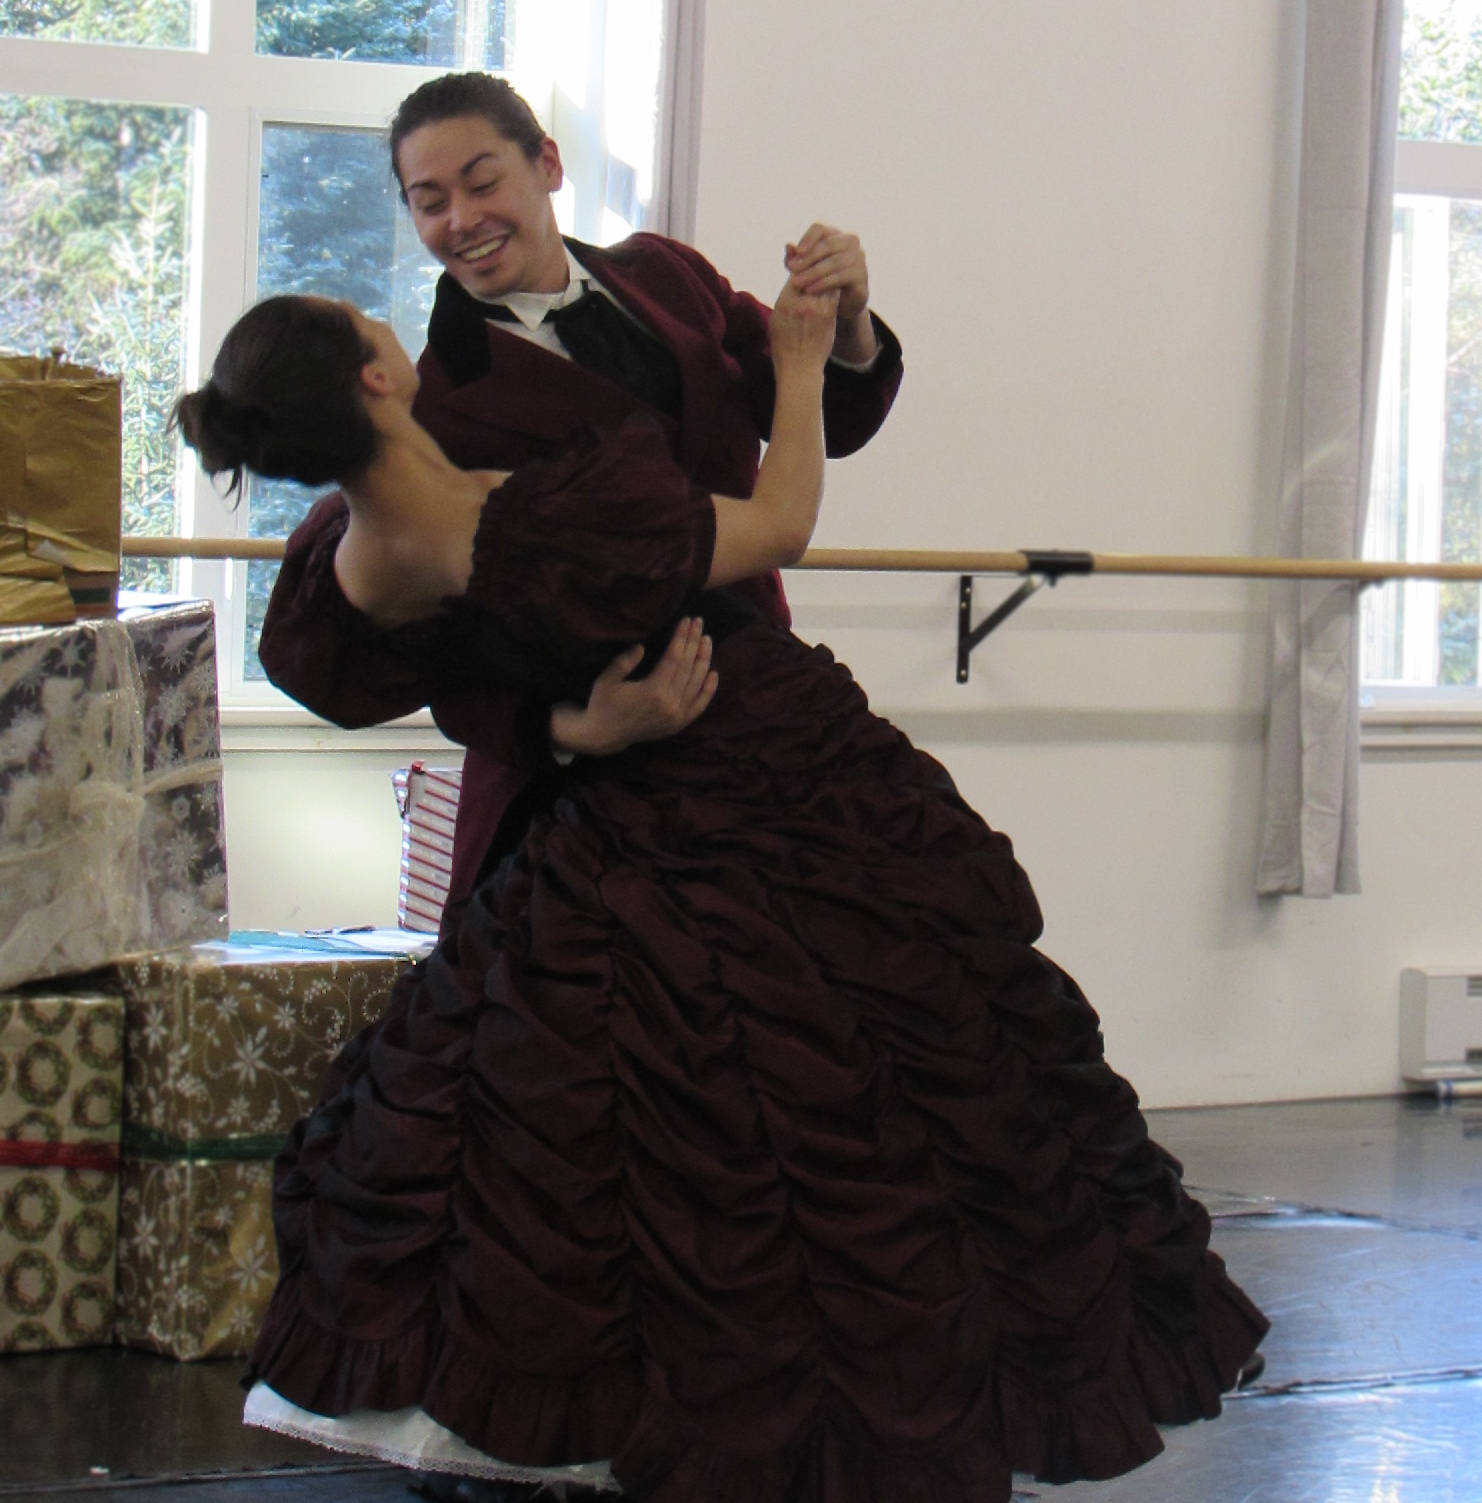 Ty Yamaoka as Herr Stahlbaum dips Frau Stahlbaum as played by Alisha Falberg during rehearsal for the upcoming Juneau Dance Theatre production of “The Nutcracker.” (Ben Hohenstatt | Capital City Weekly)